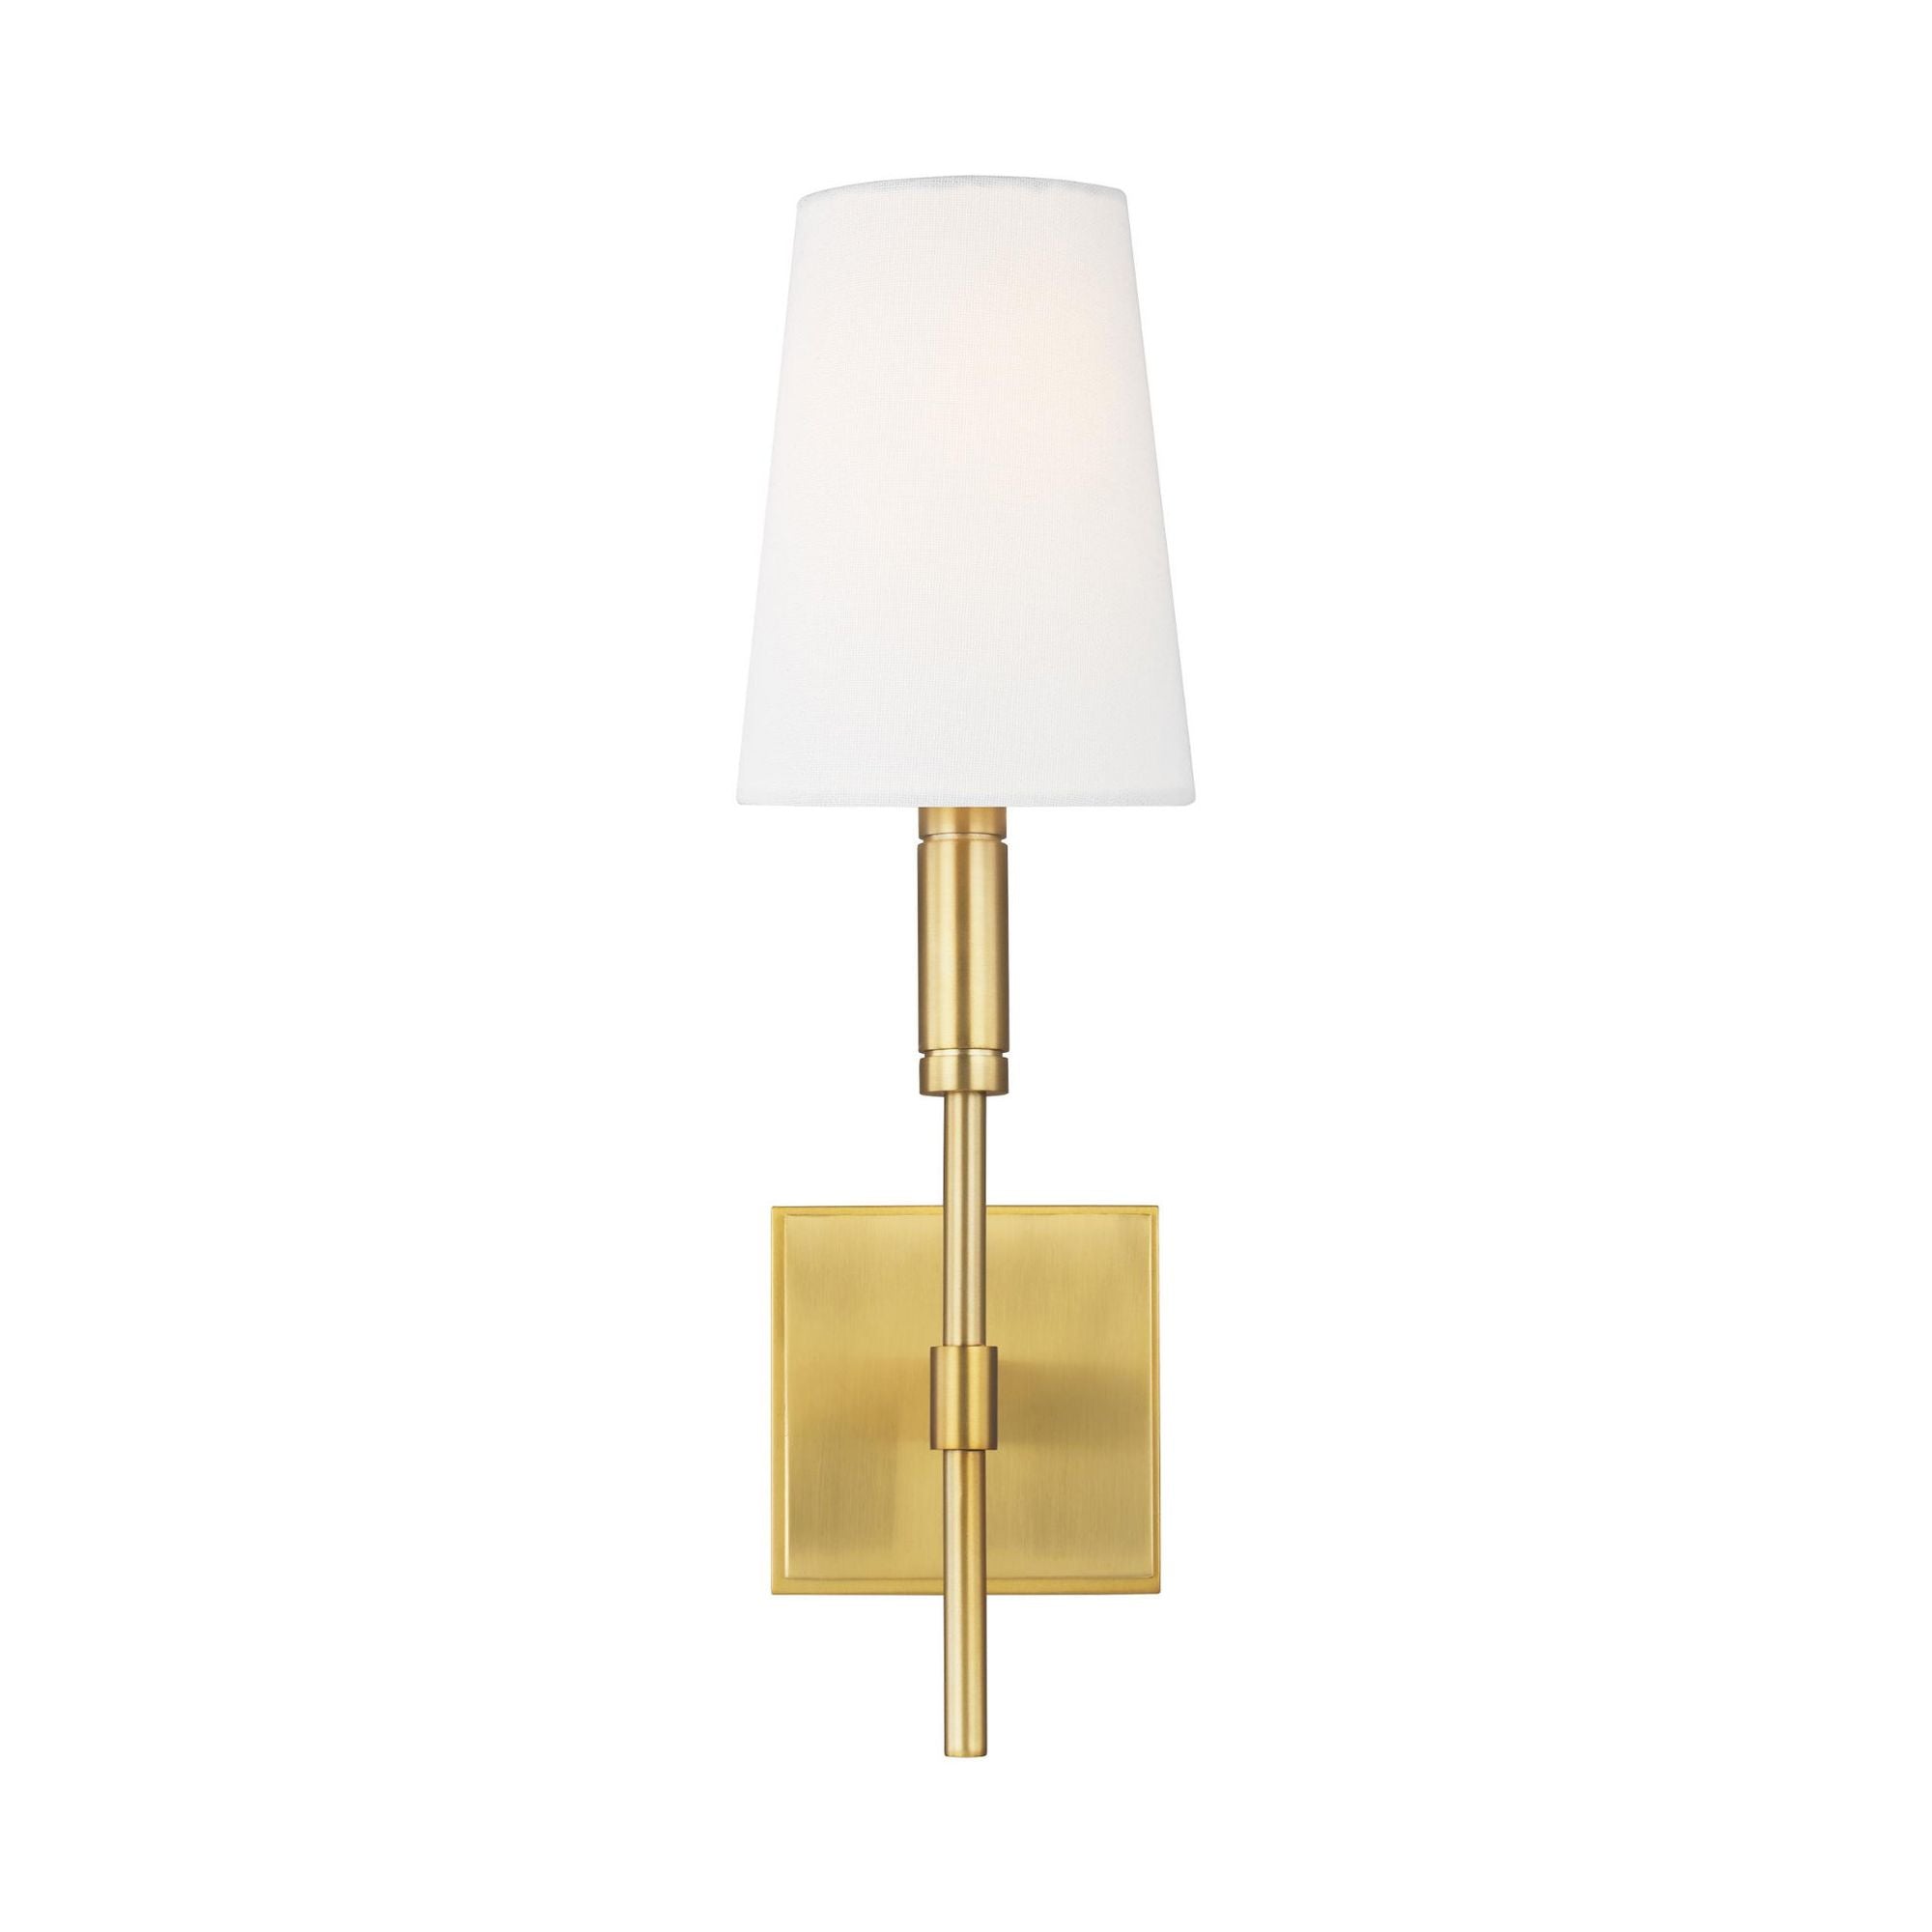 Thomas O'Brien Beckham Classic Sconce in Burnished Brass